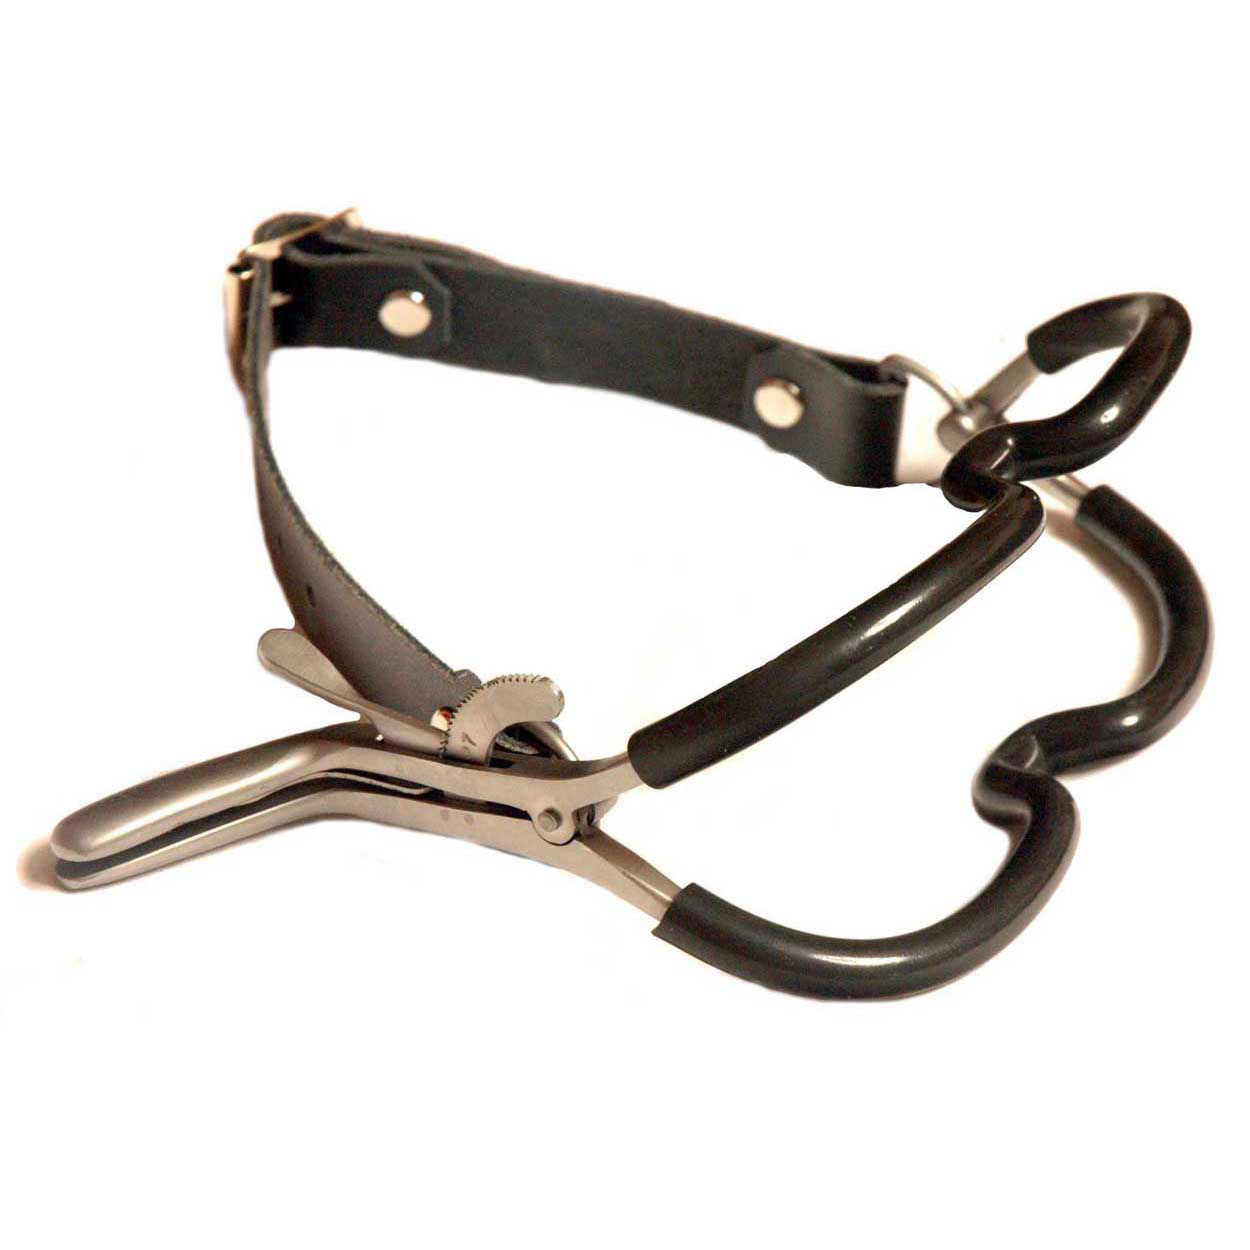 PVC Coated Jennings Dental Gag with Buckling Leather Strap